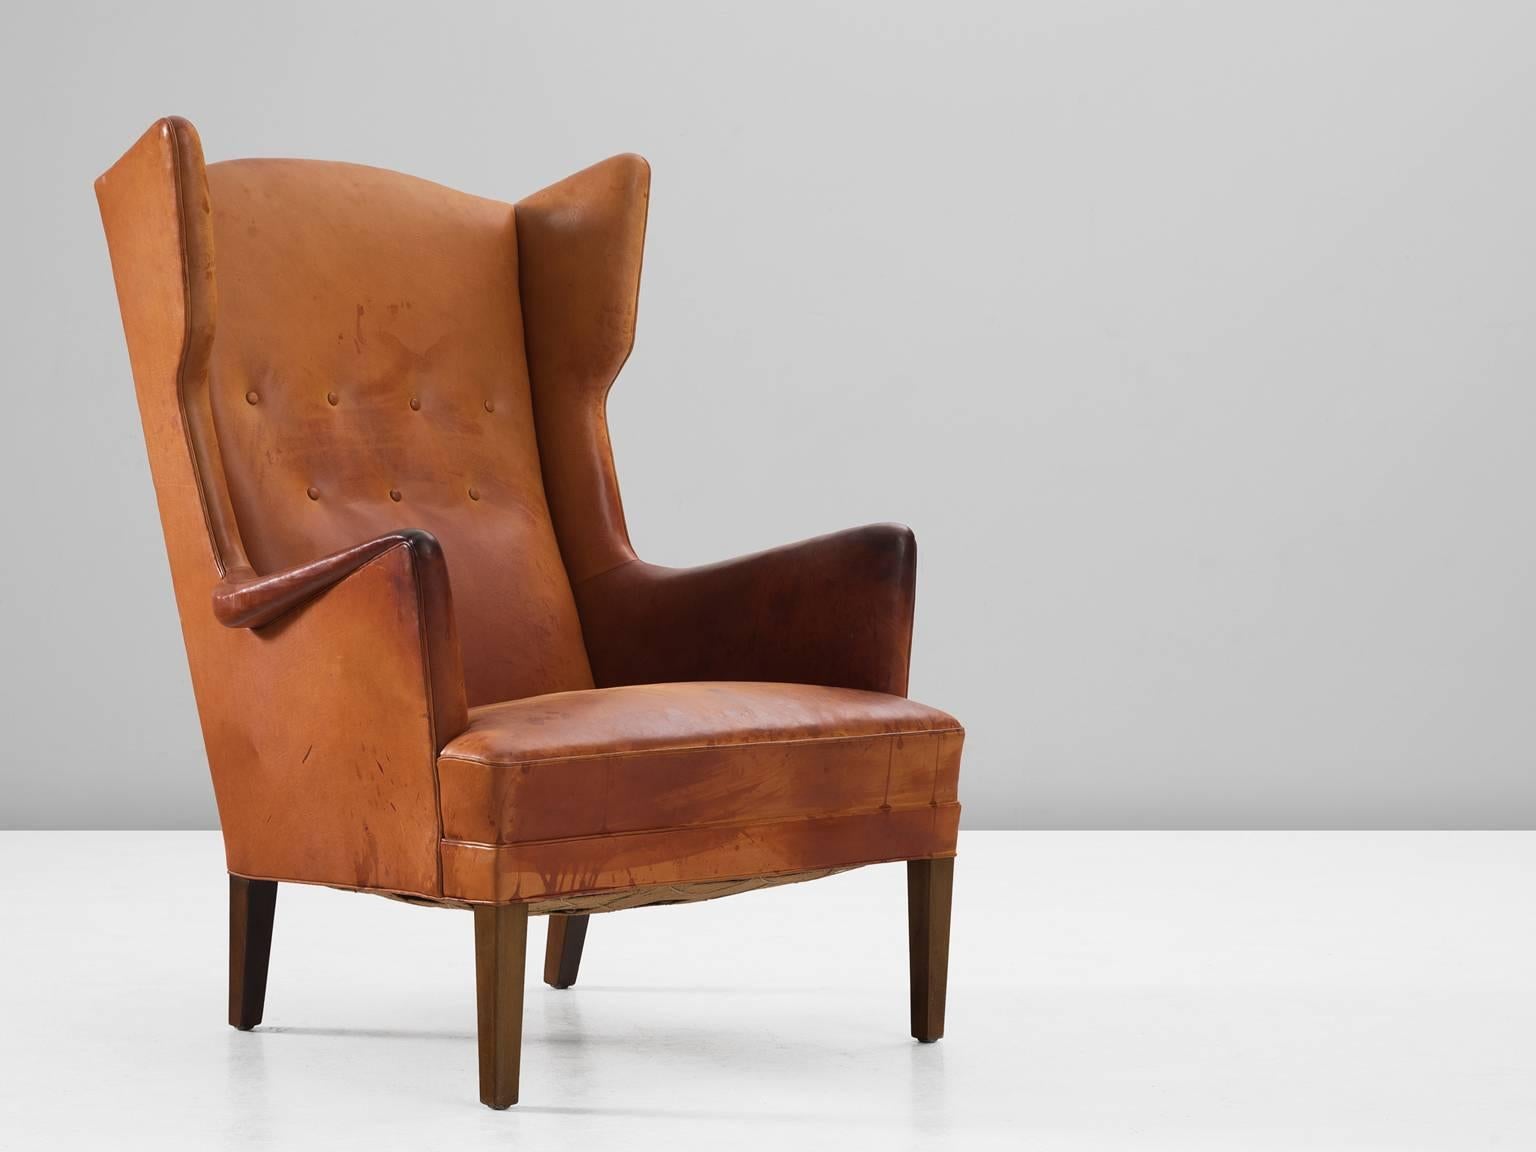 Lounge chair, in leather and wood, by Frits Henningsen, Denmark, 1950s. 

Rare wingback chair by Danish Designer Frits Henningsen. This chair shows the lines of a classical chair, yet combined with just enough modern details, to make it into a